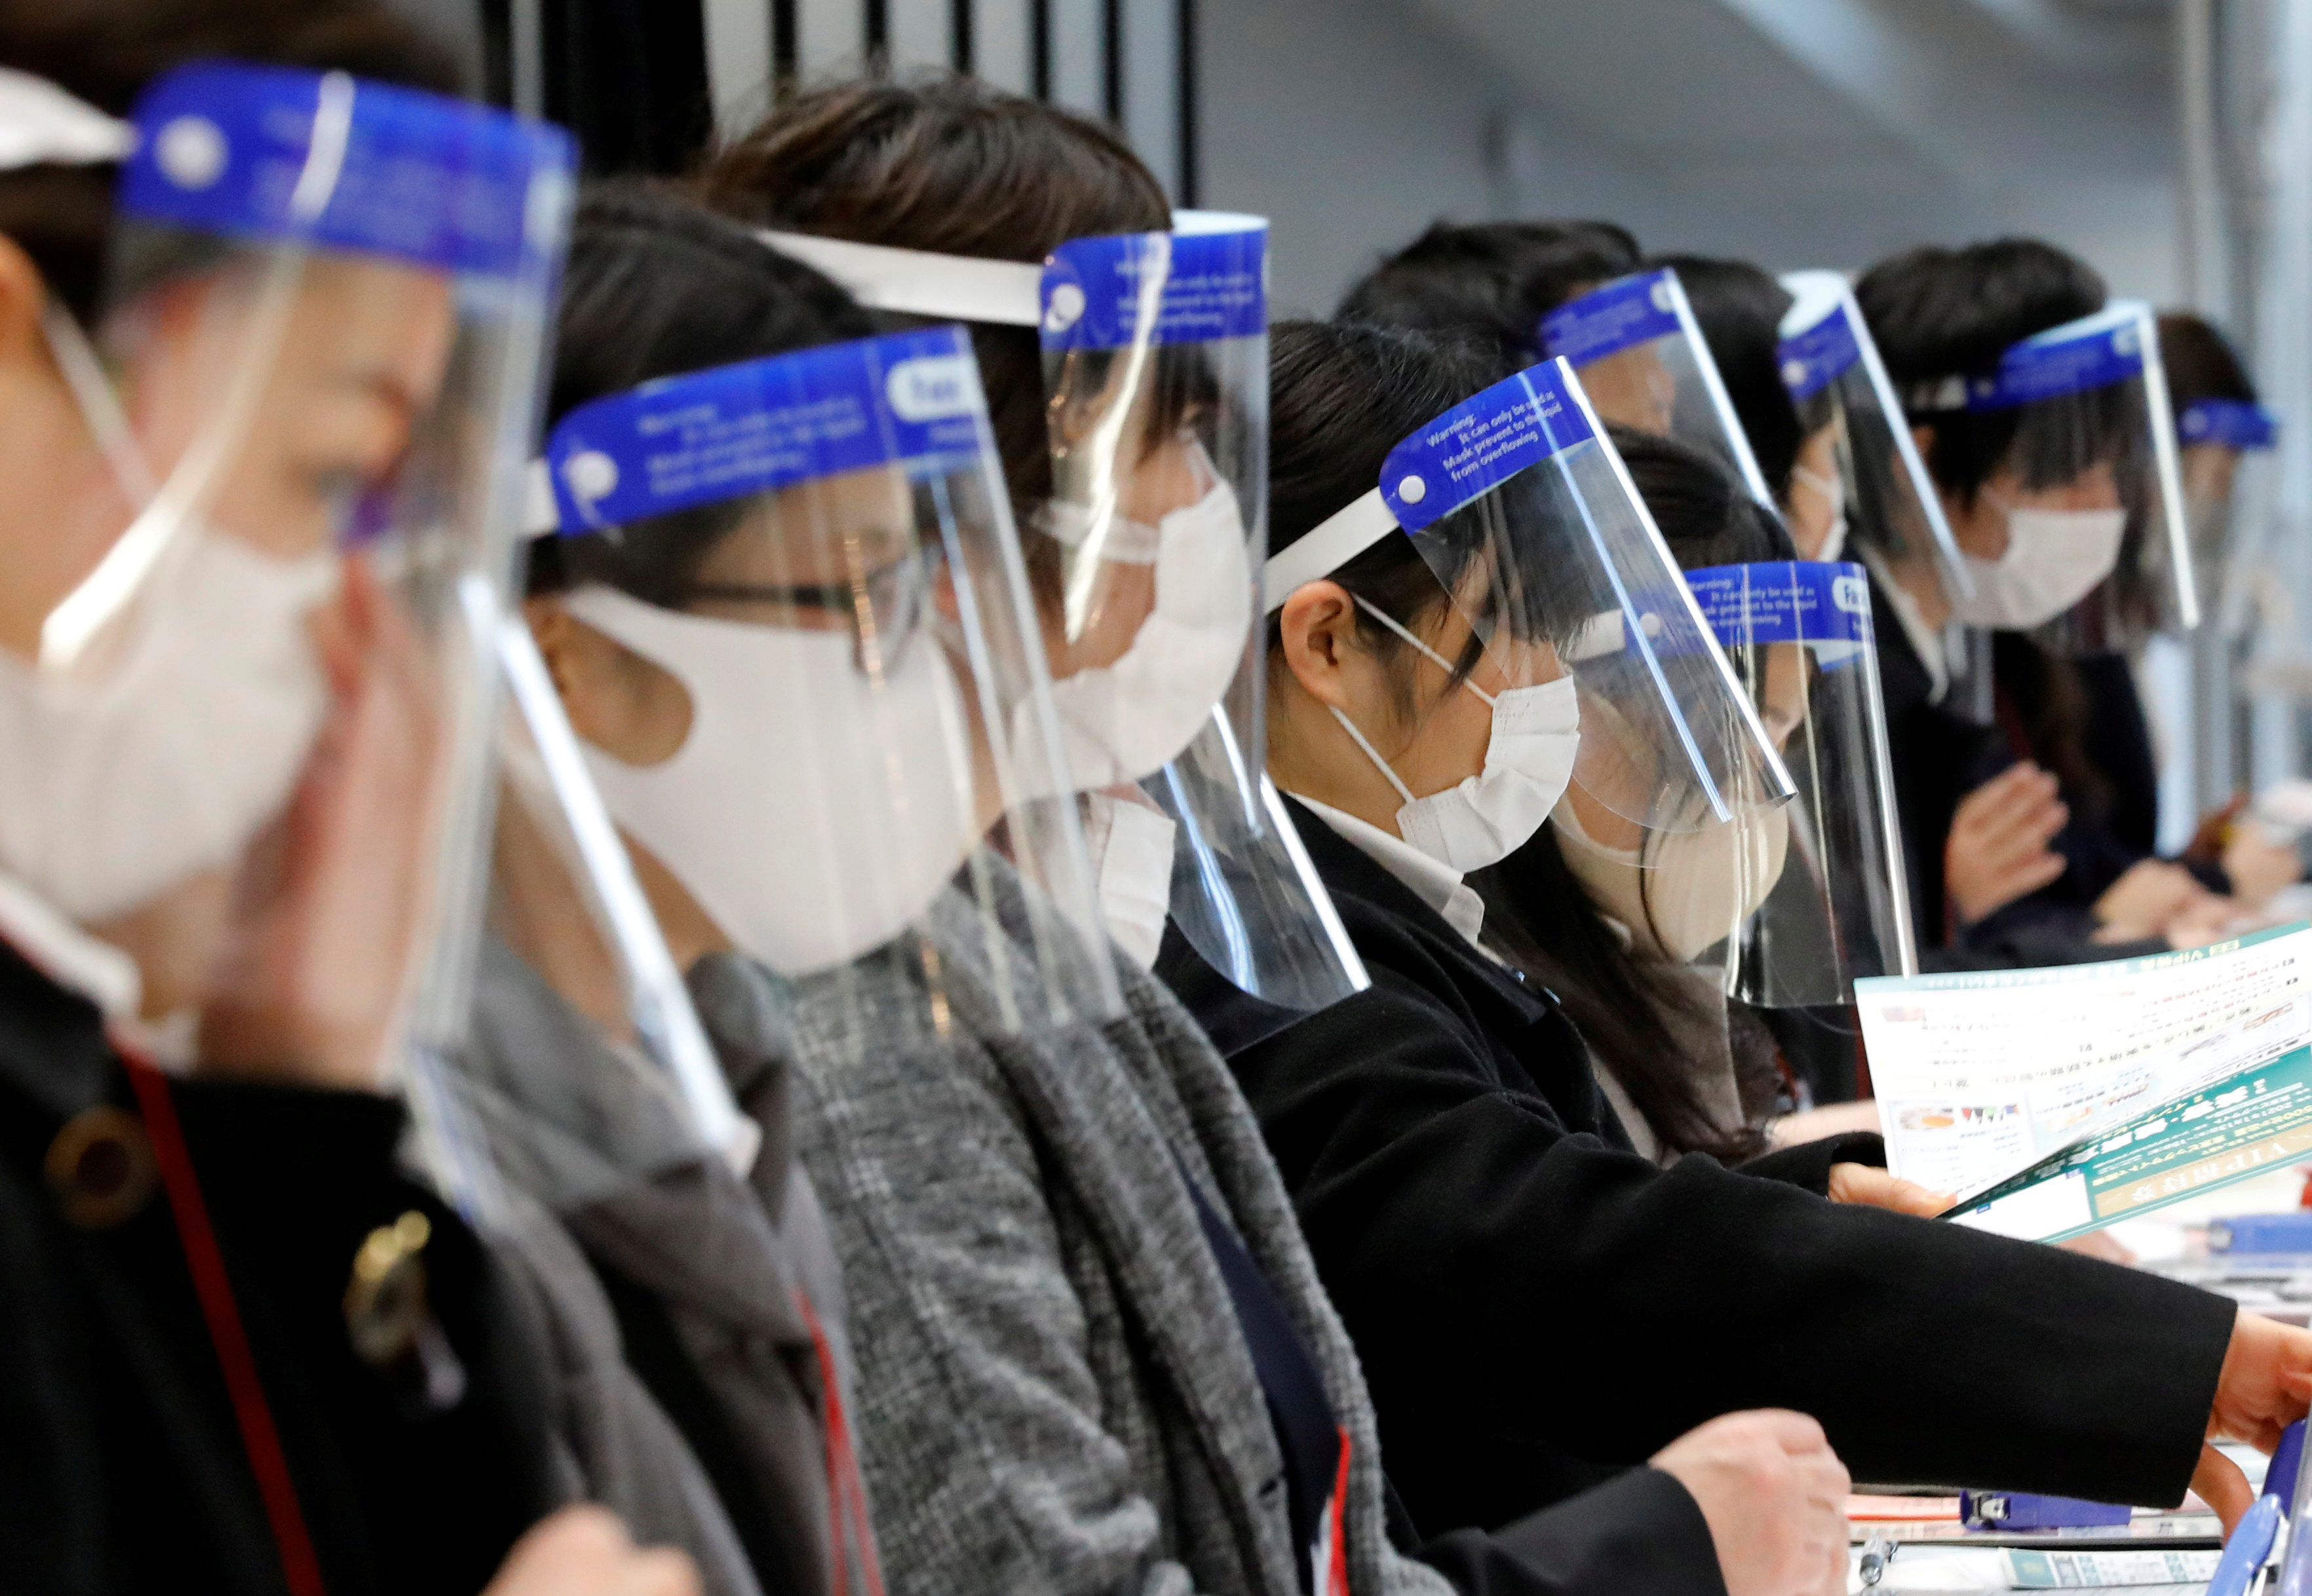 Staff wearing protective face shields amid the coronavirus disease (COVID-19) outbreak work at a reception desk at an exhibition centre in Tokyo, Japan, January 13, 2021. REUTERS/Kim Kyung-Hoon/File Photo